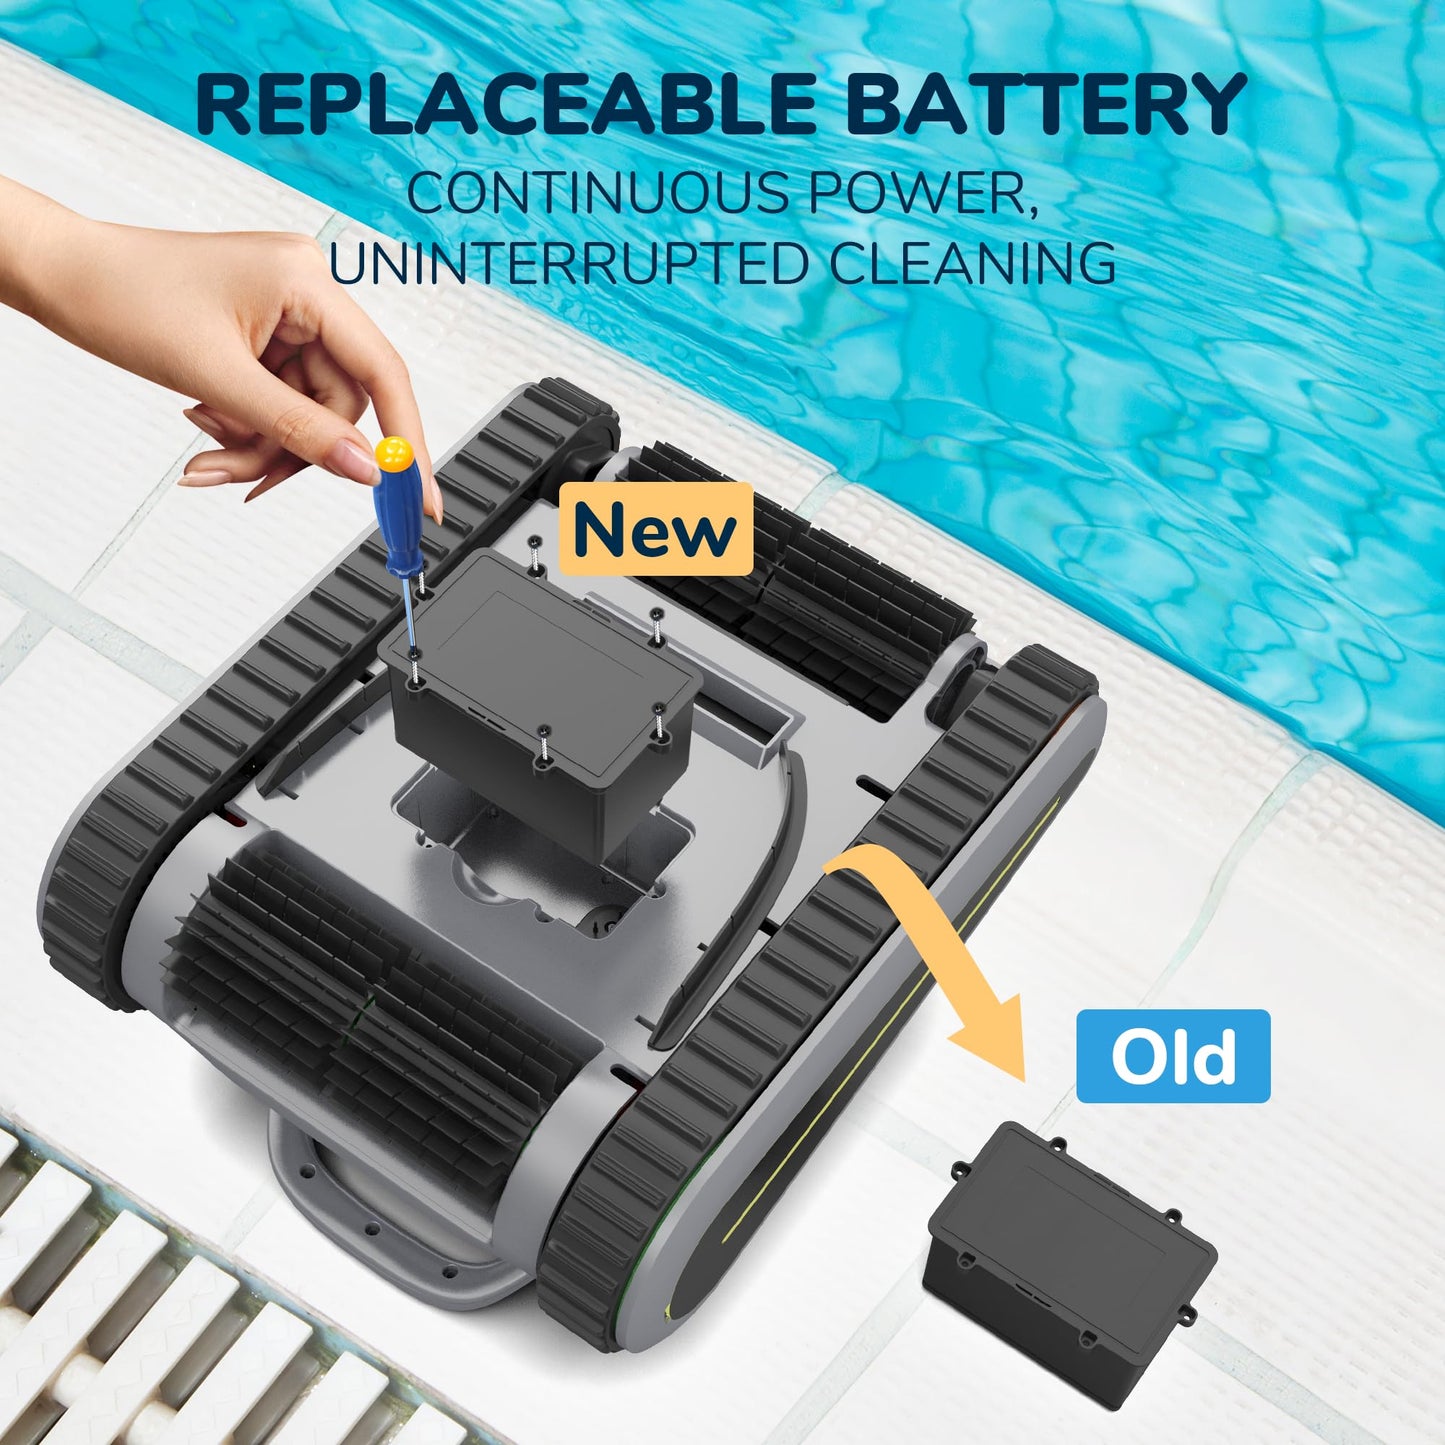 AquaFond Crab Robotic Pool Vacuum-Wall Climbing Capability- Replaceable Battery-Working Time More Than 1.5 Hours Cordless Pool Vacuum, Ideal for In-Ground Pools of 1614 Square Feet